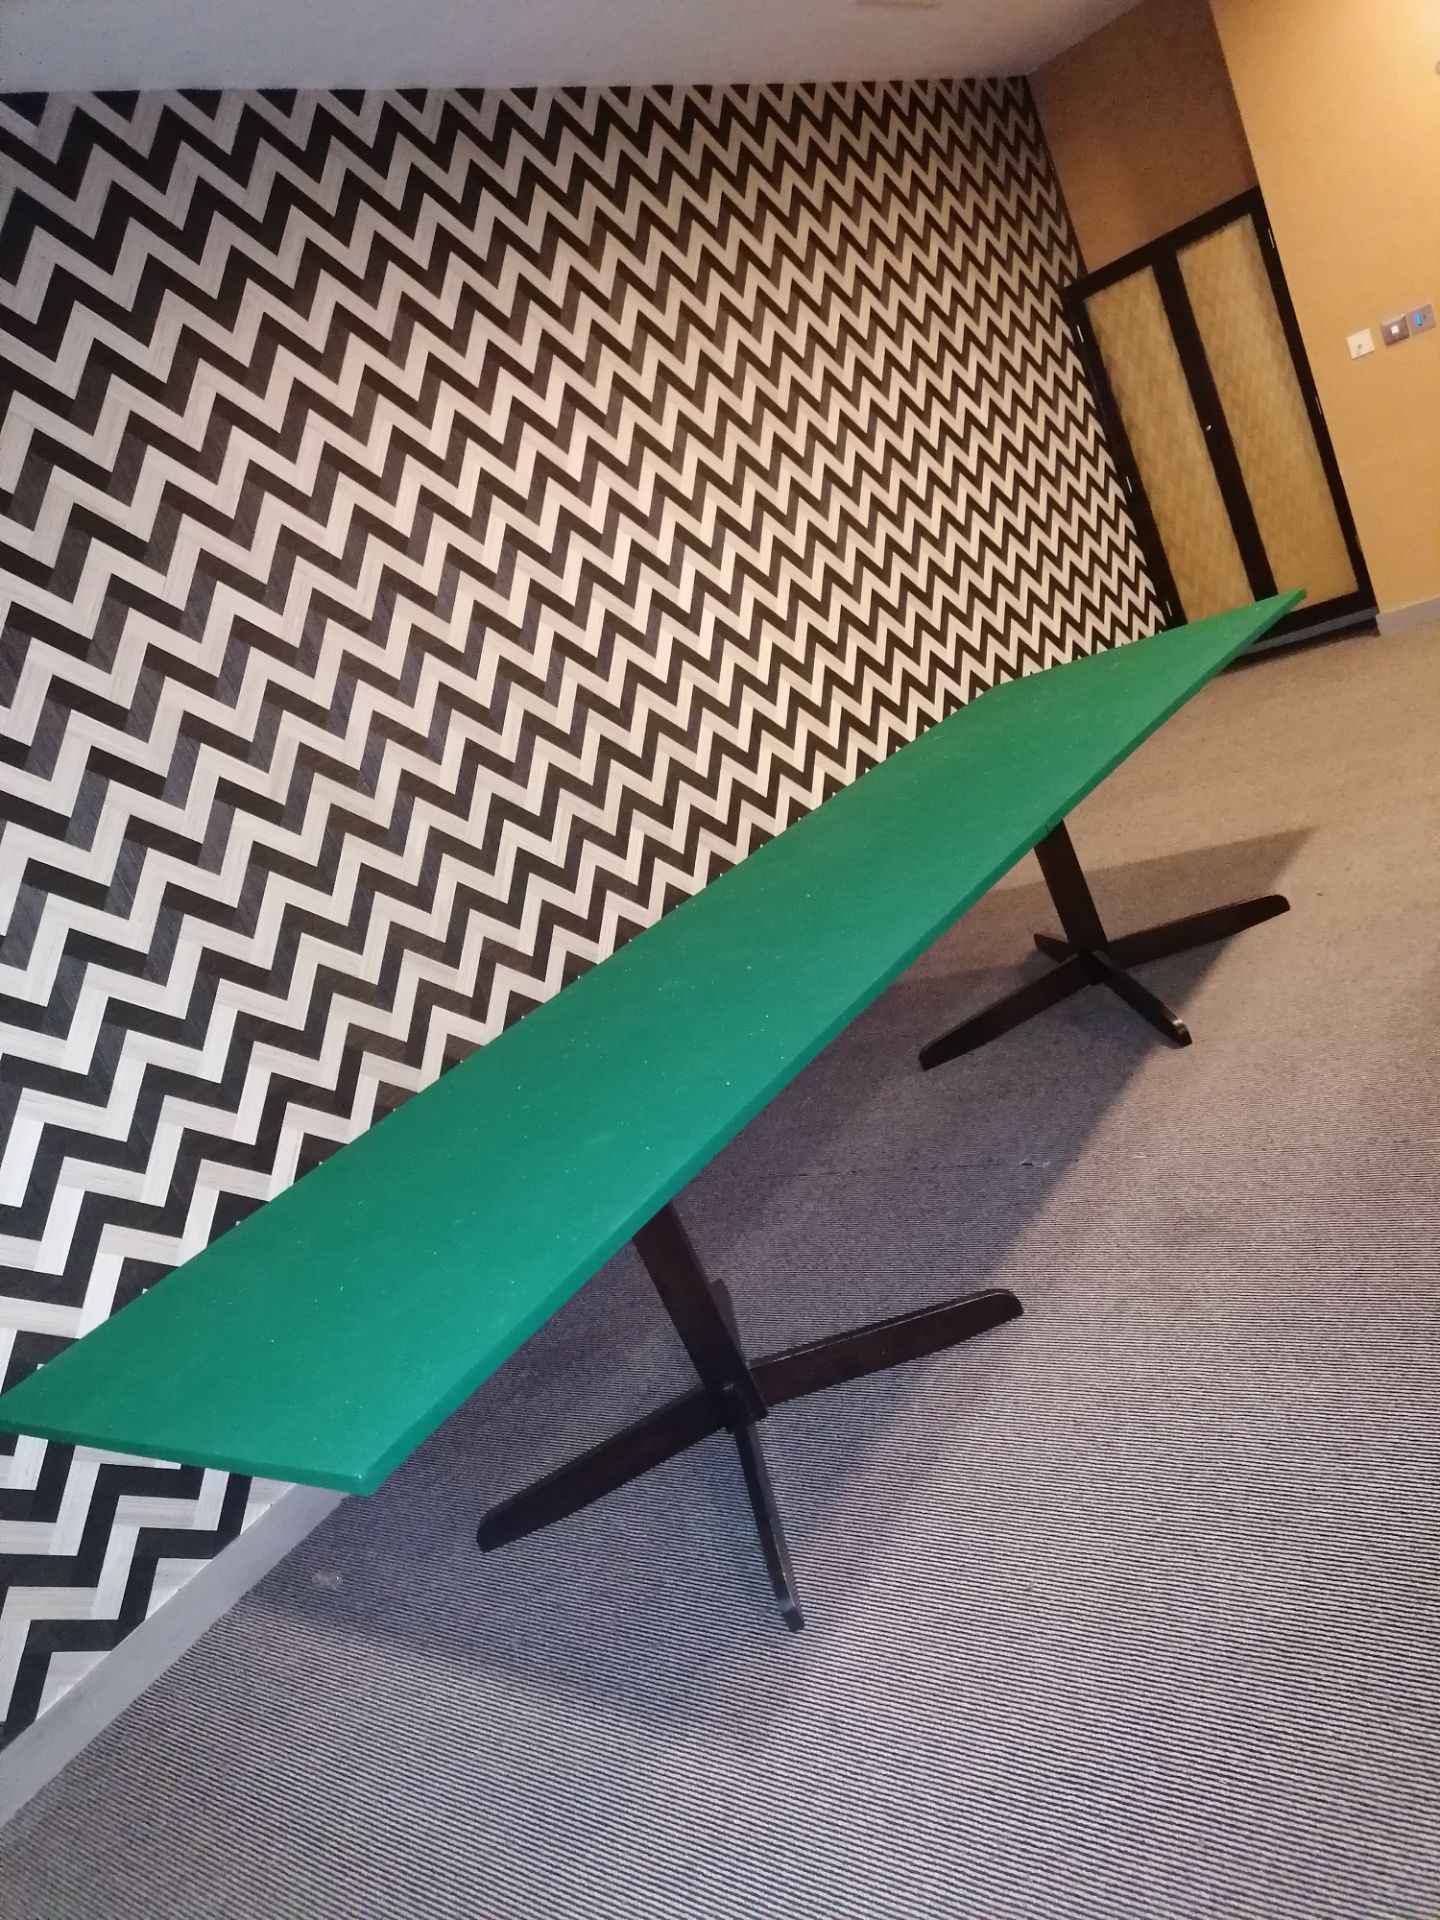 2 x Tables measuring 1.8m x 1m x 0.75m . Note tabl - Image 3 of 3